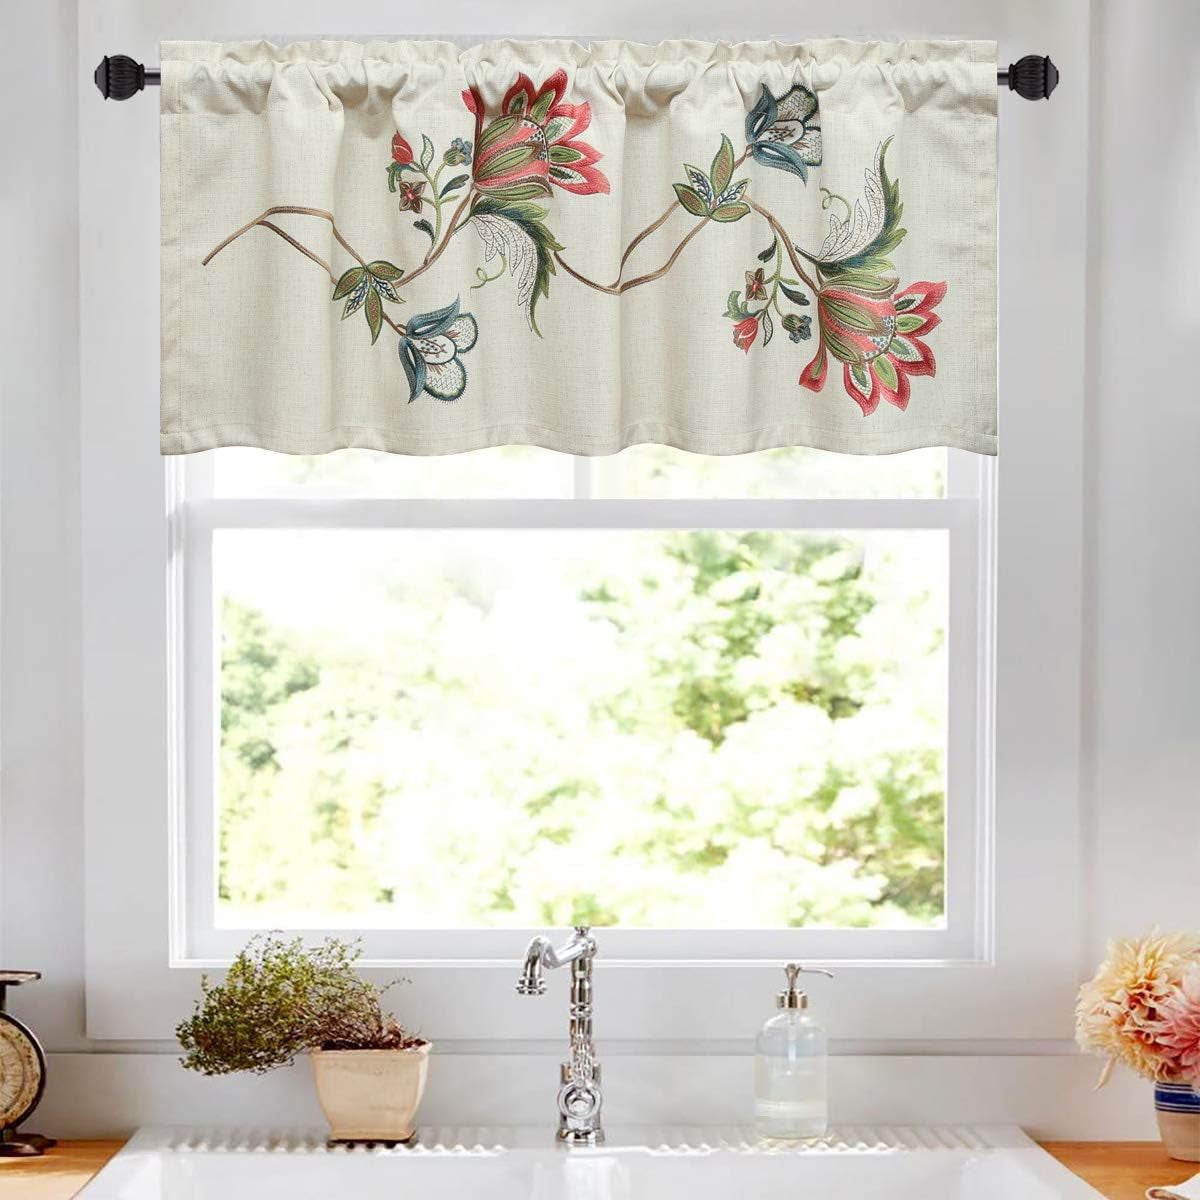 VOGOL Linen Valances for Living Room, Vintage Floral Valance for Bedroom, Rod Pocket Valance Curtains for Dining Room, 52''W X 18''L, One Panel, Flower Embroidery  YouYee   